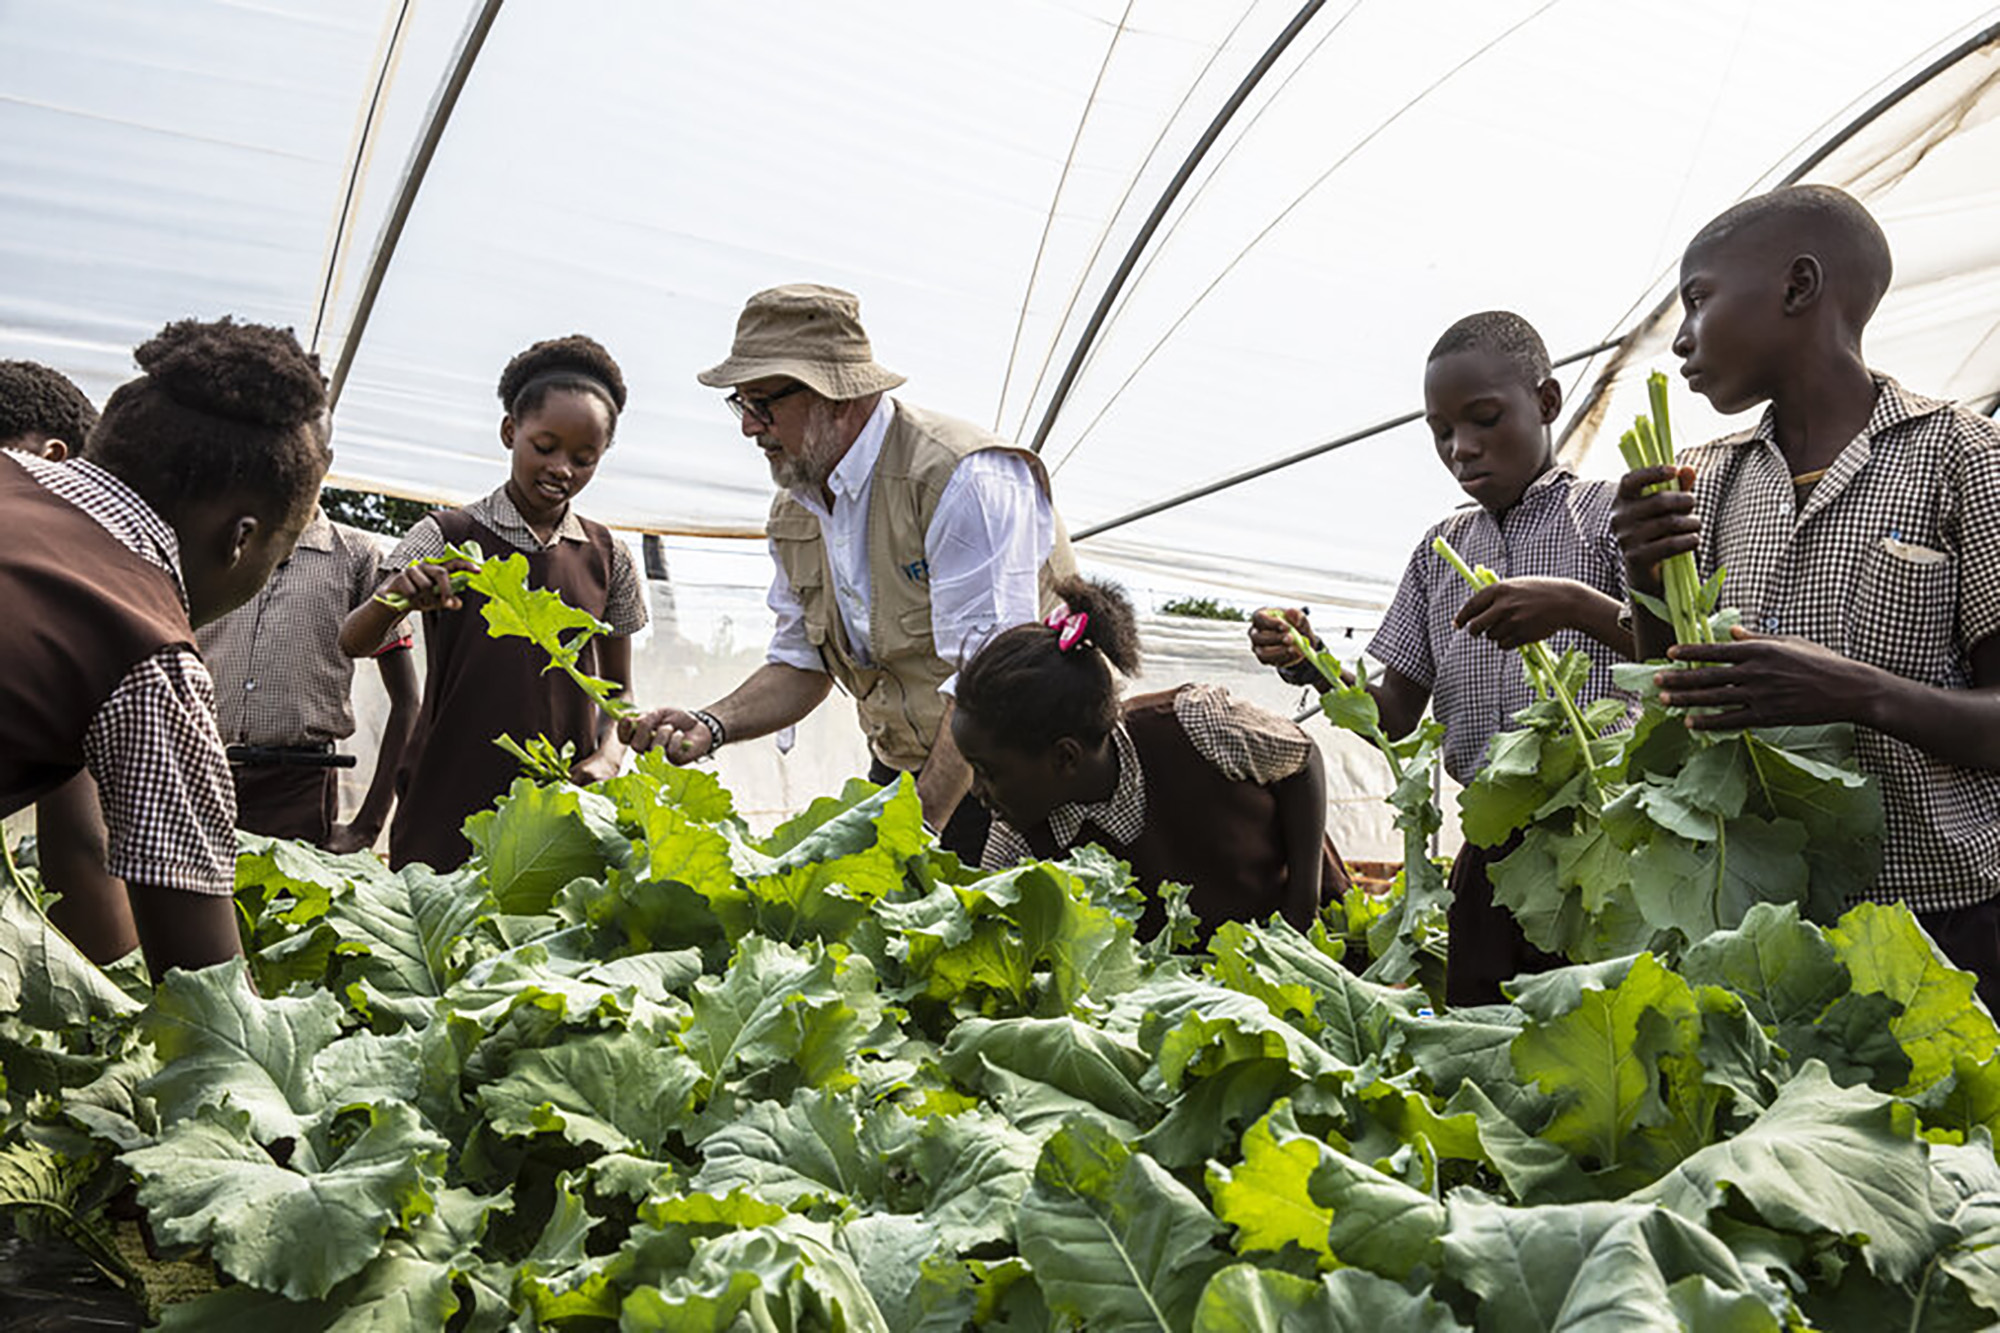 An American chef checks out the greens grown by a group of students at a Zambian primary school.